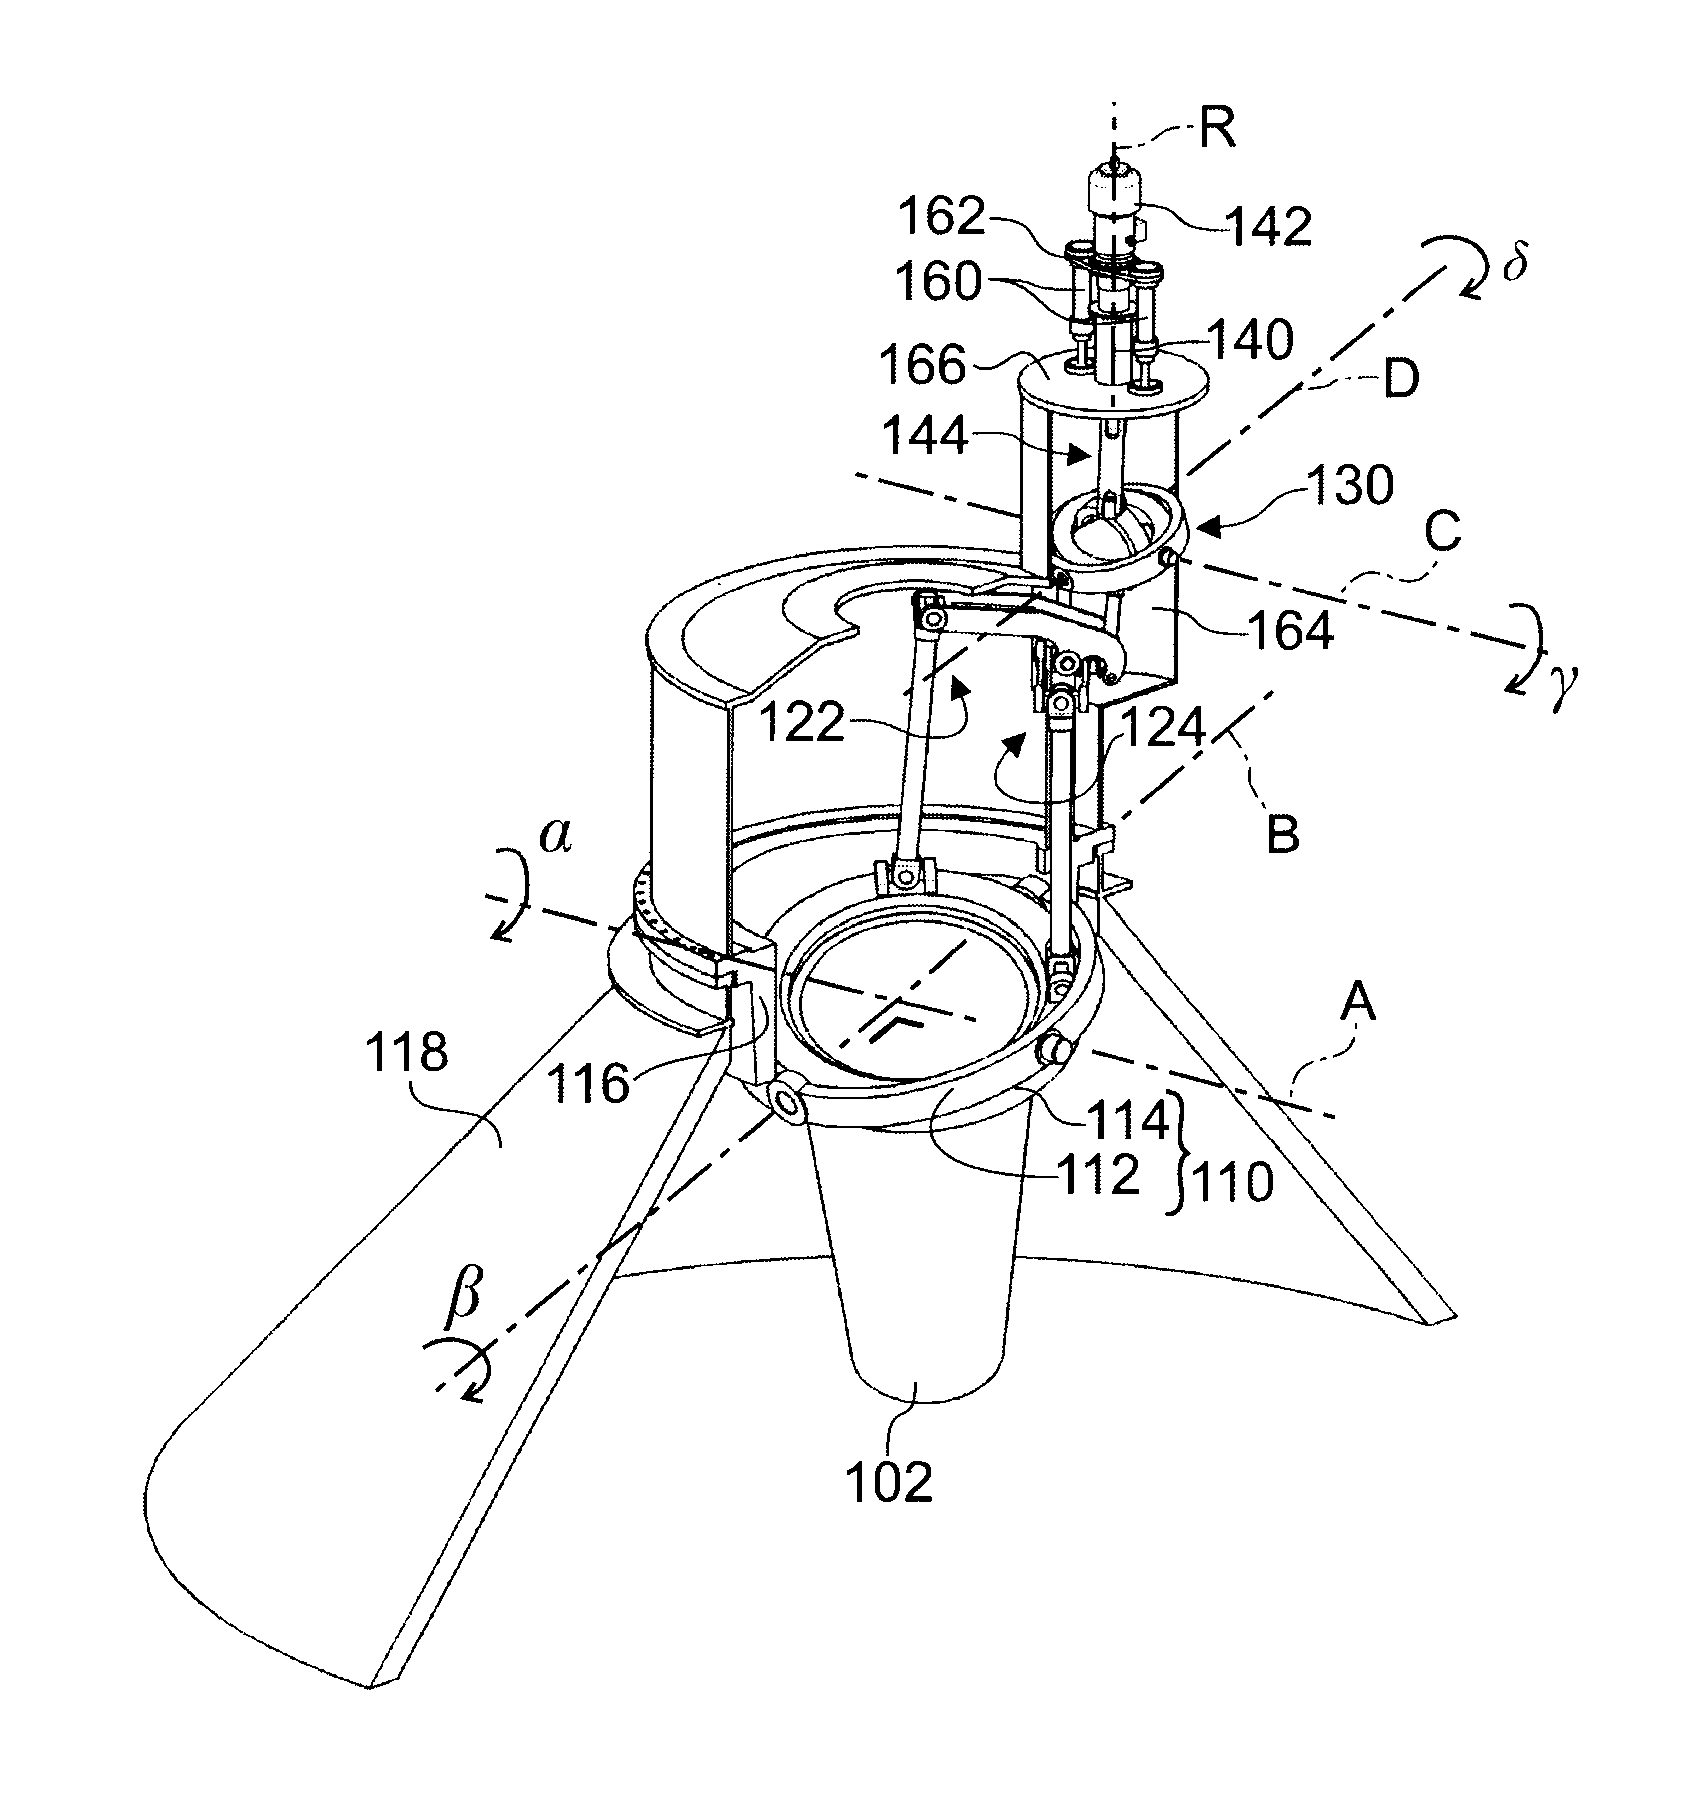 Device for distributing bulk material with a distribution spout supported by a cardan suspension